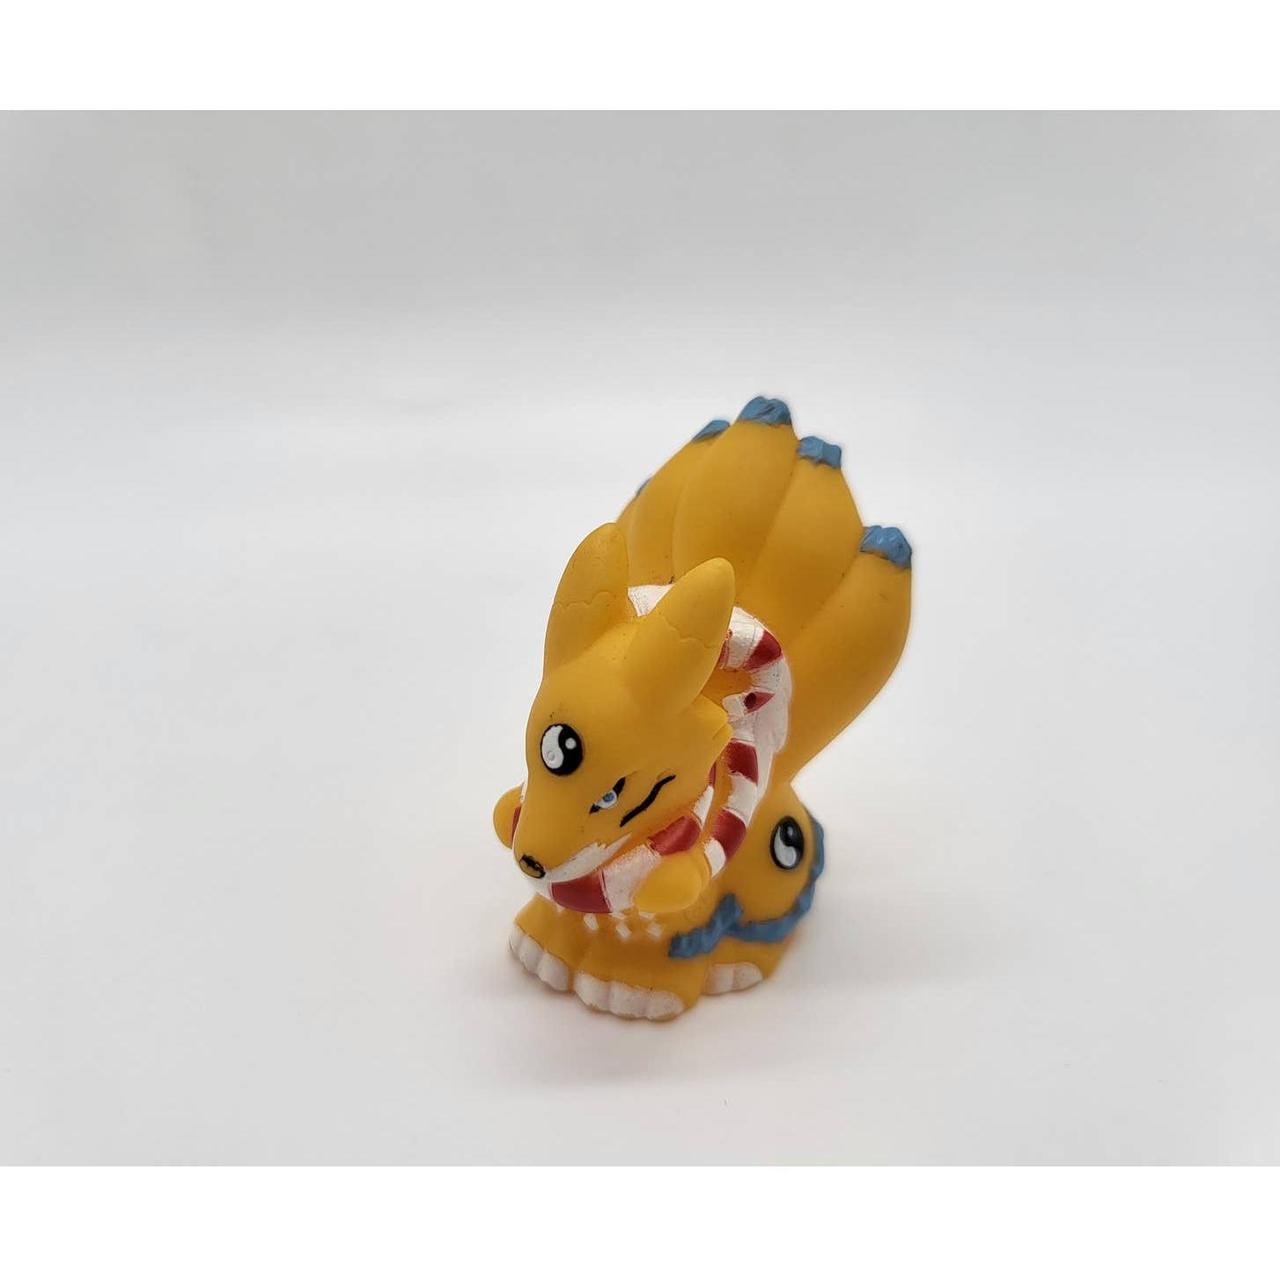 item listed by pokemall